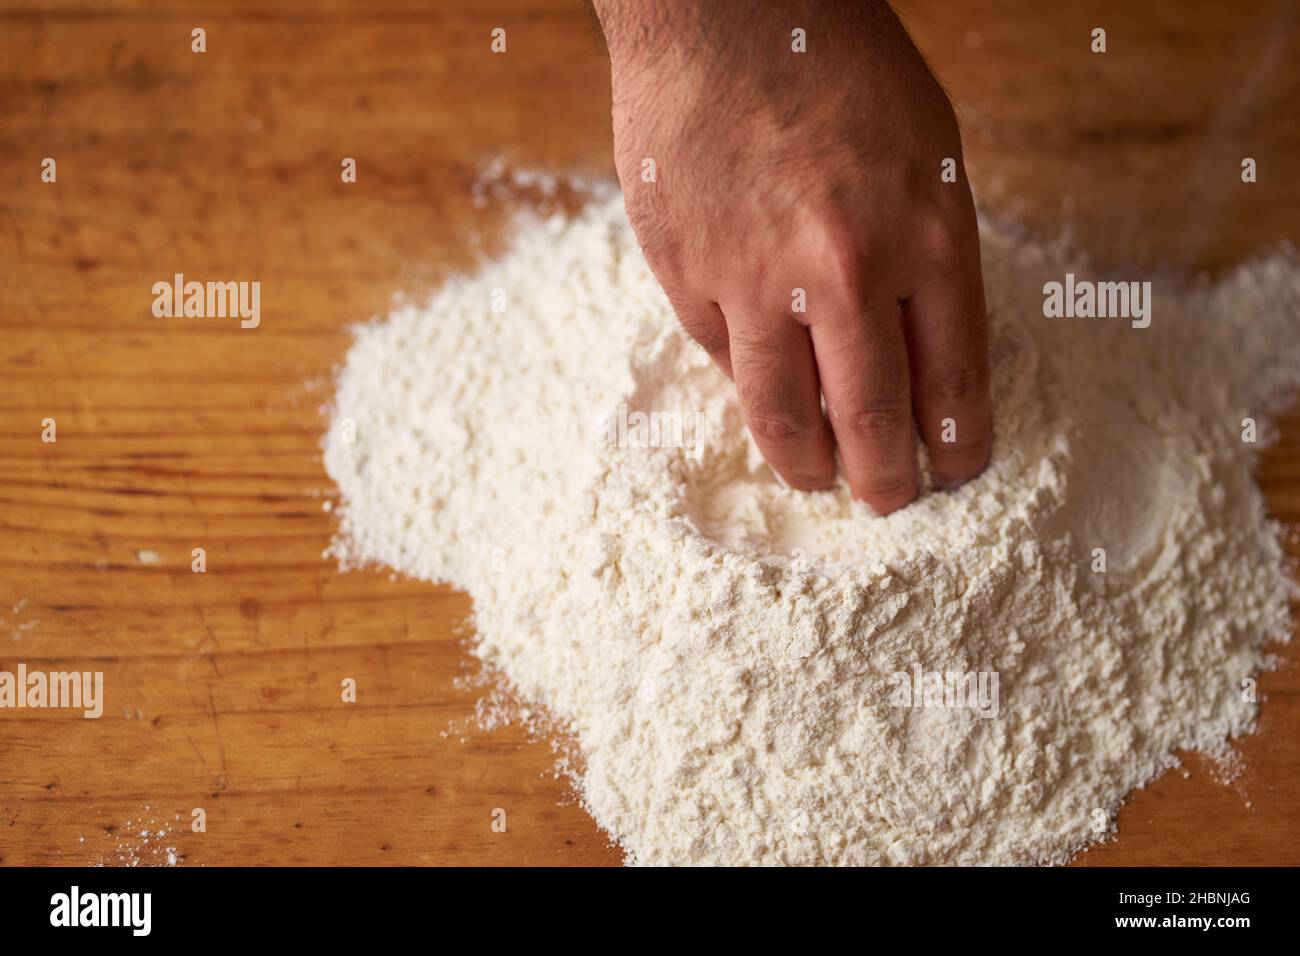 a cook's hands make a flour volcano on a wooden table Stock Photo